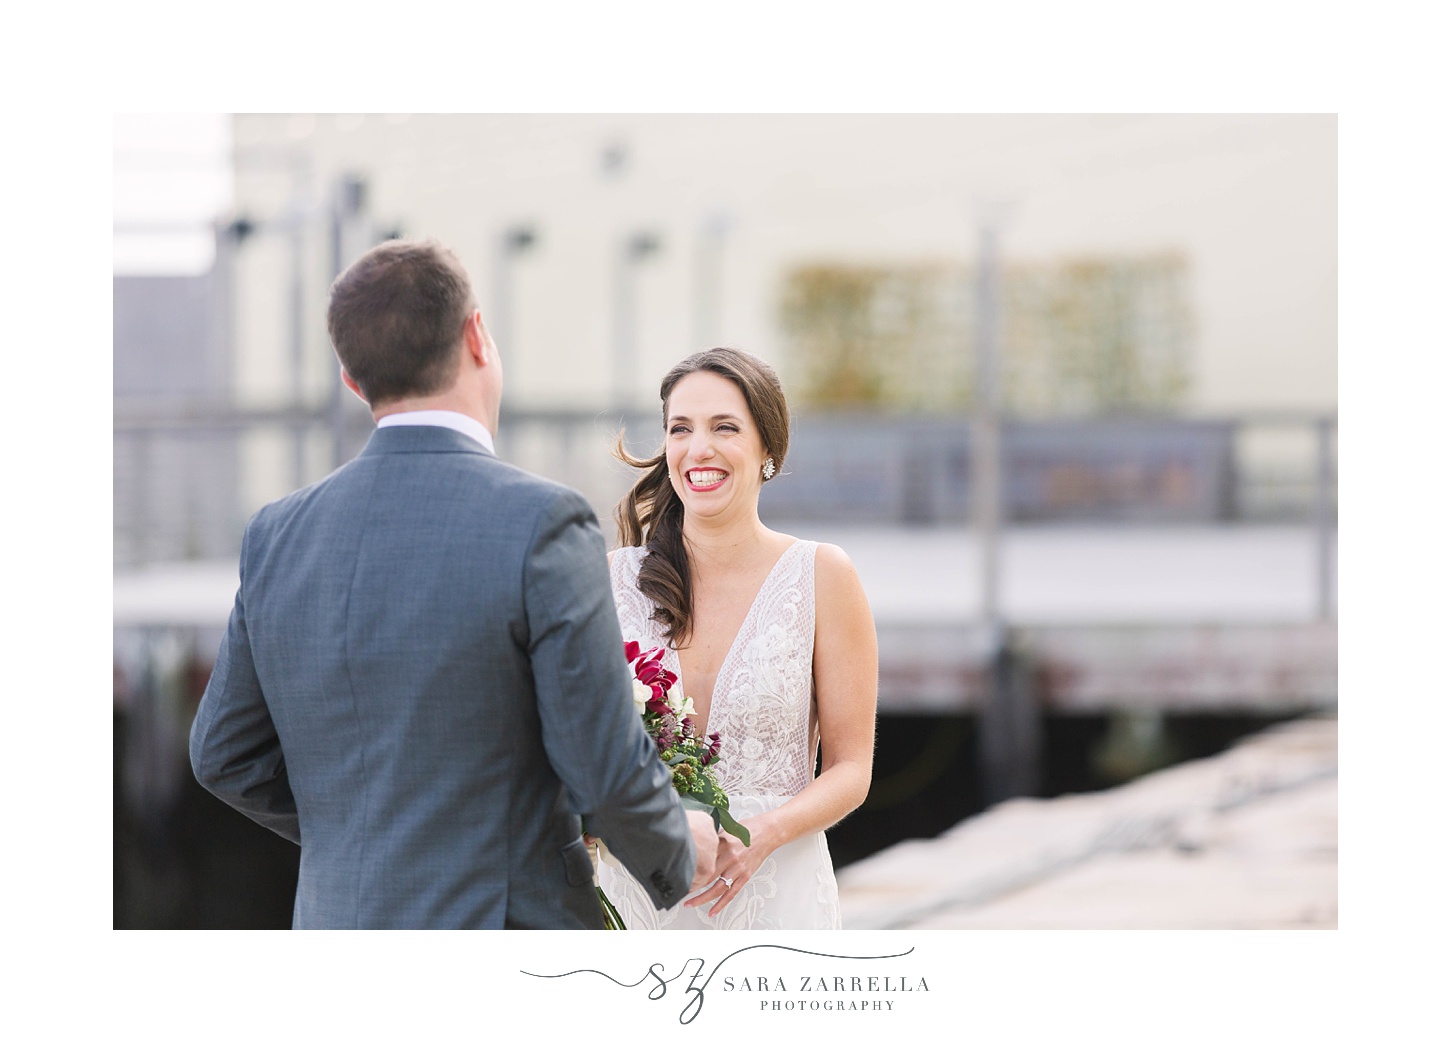 Is A First Look Right For You?: A Photography Mini-Series with Dan Philips and Sara Zarrella on Wedding Secrets Unveiled! podcast